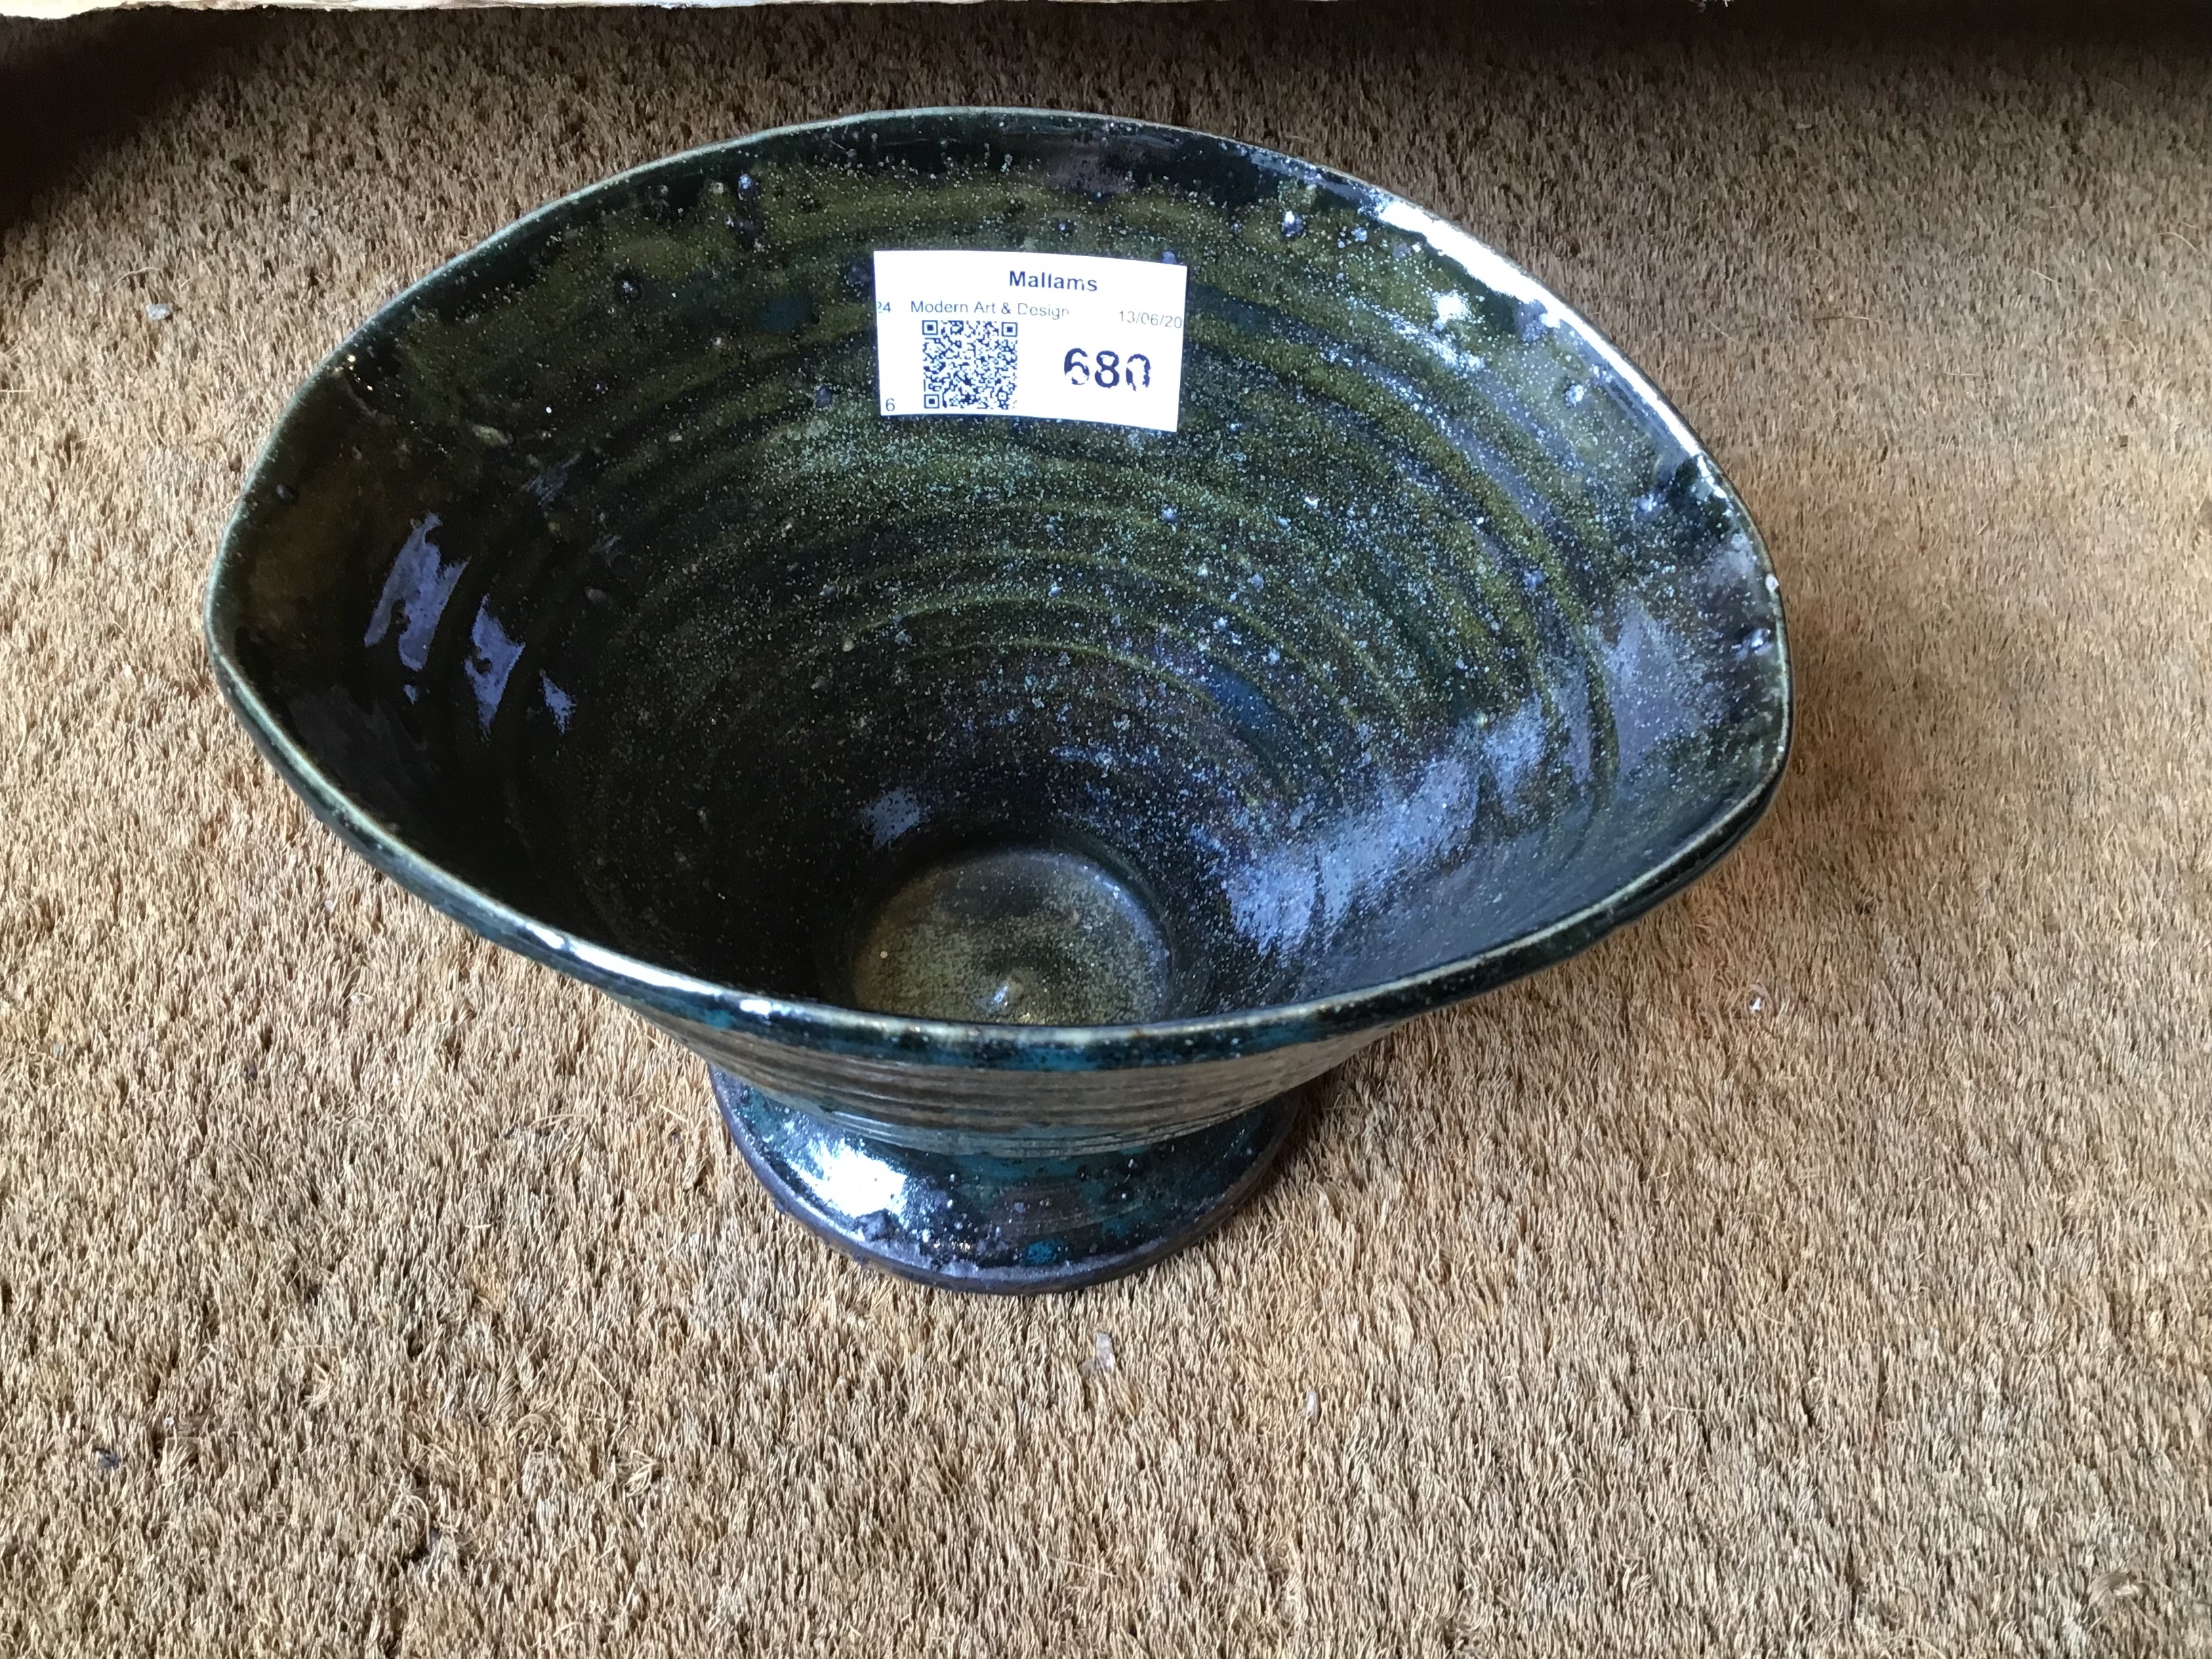 Rosemary Wren (1922-2013) at Oxshott Pottery Bowl squeezed form with green and dark glaze - Image 13 of 17